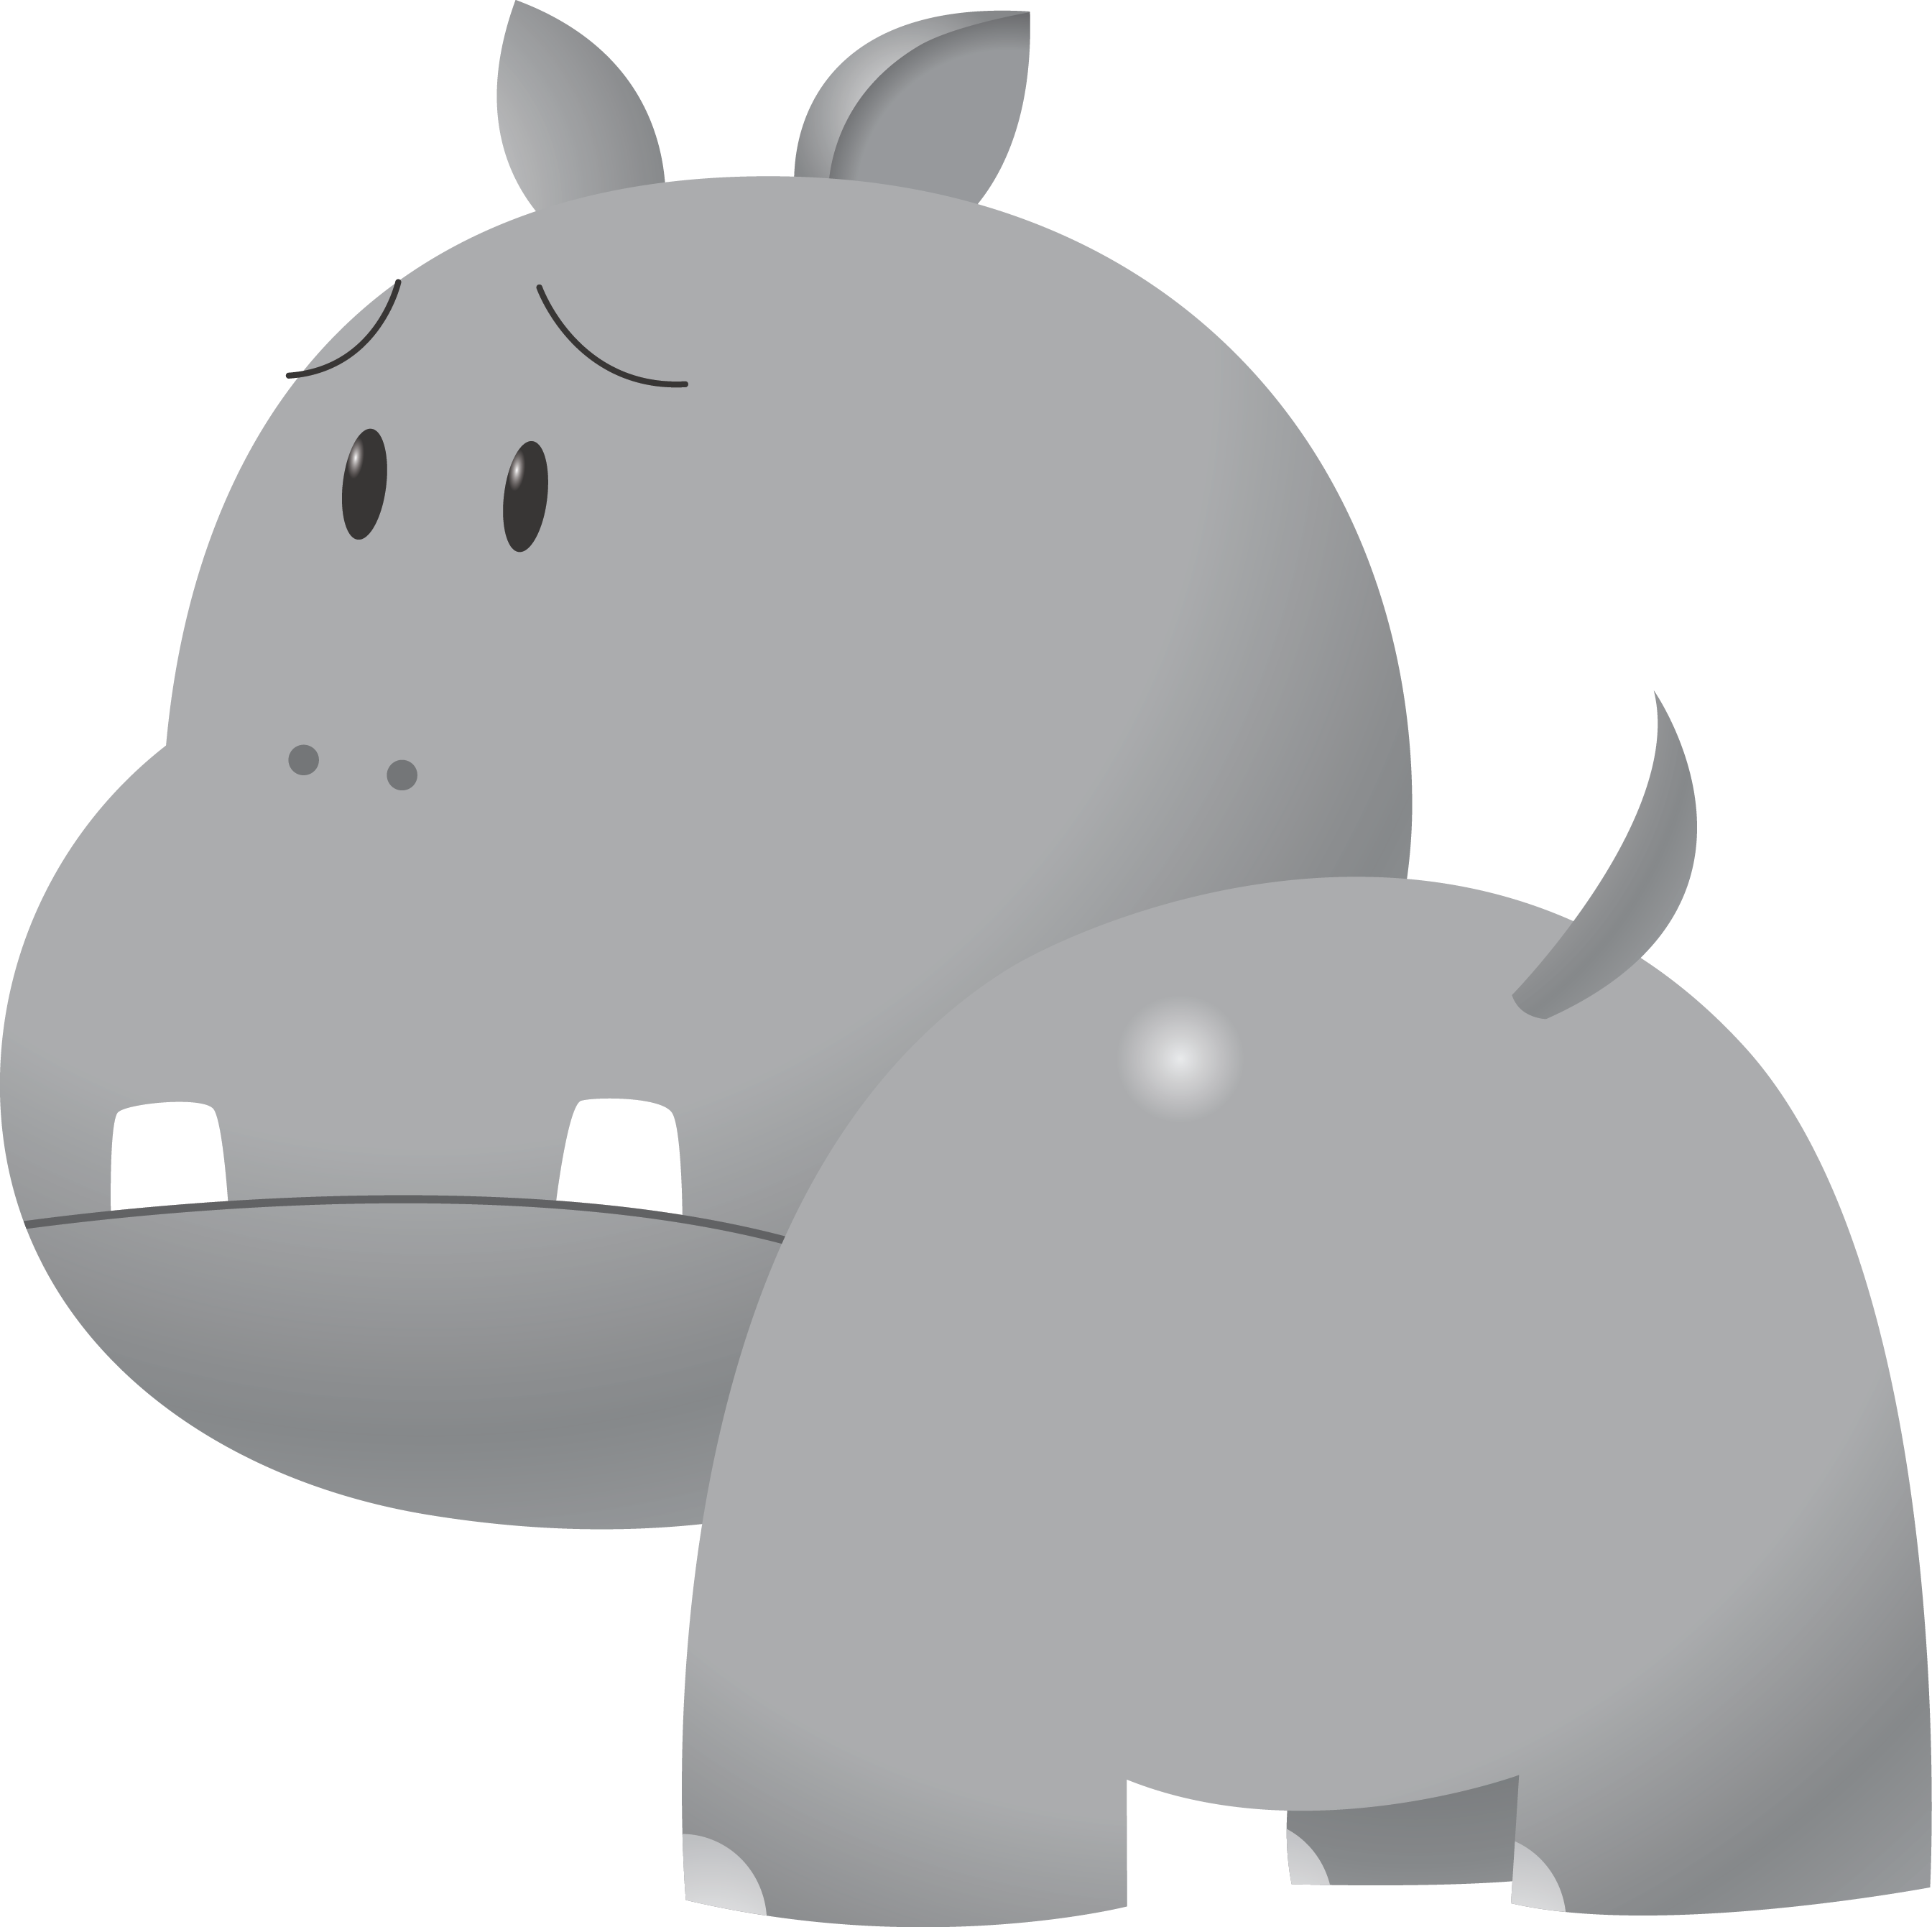 Hippo clipart dee image 2